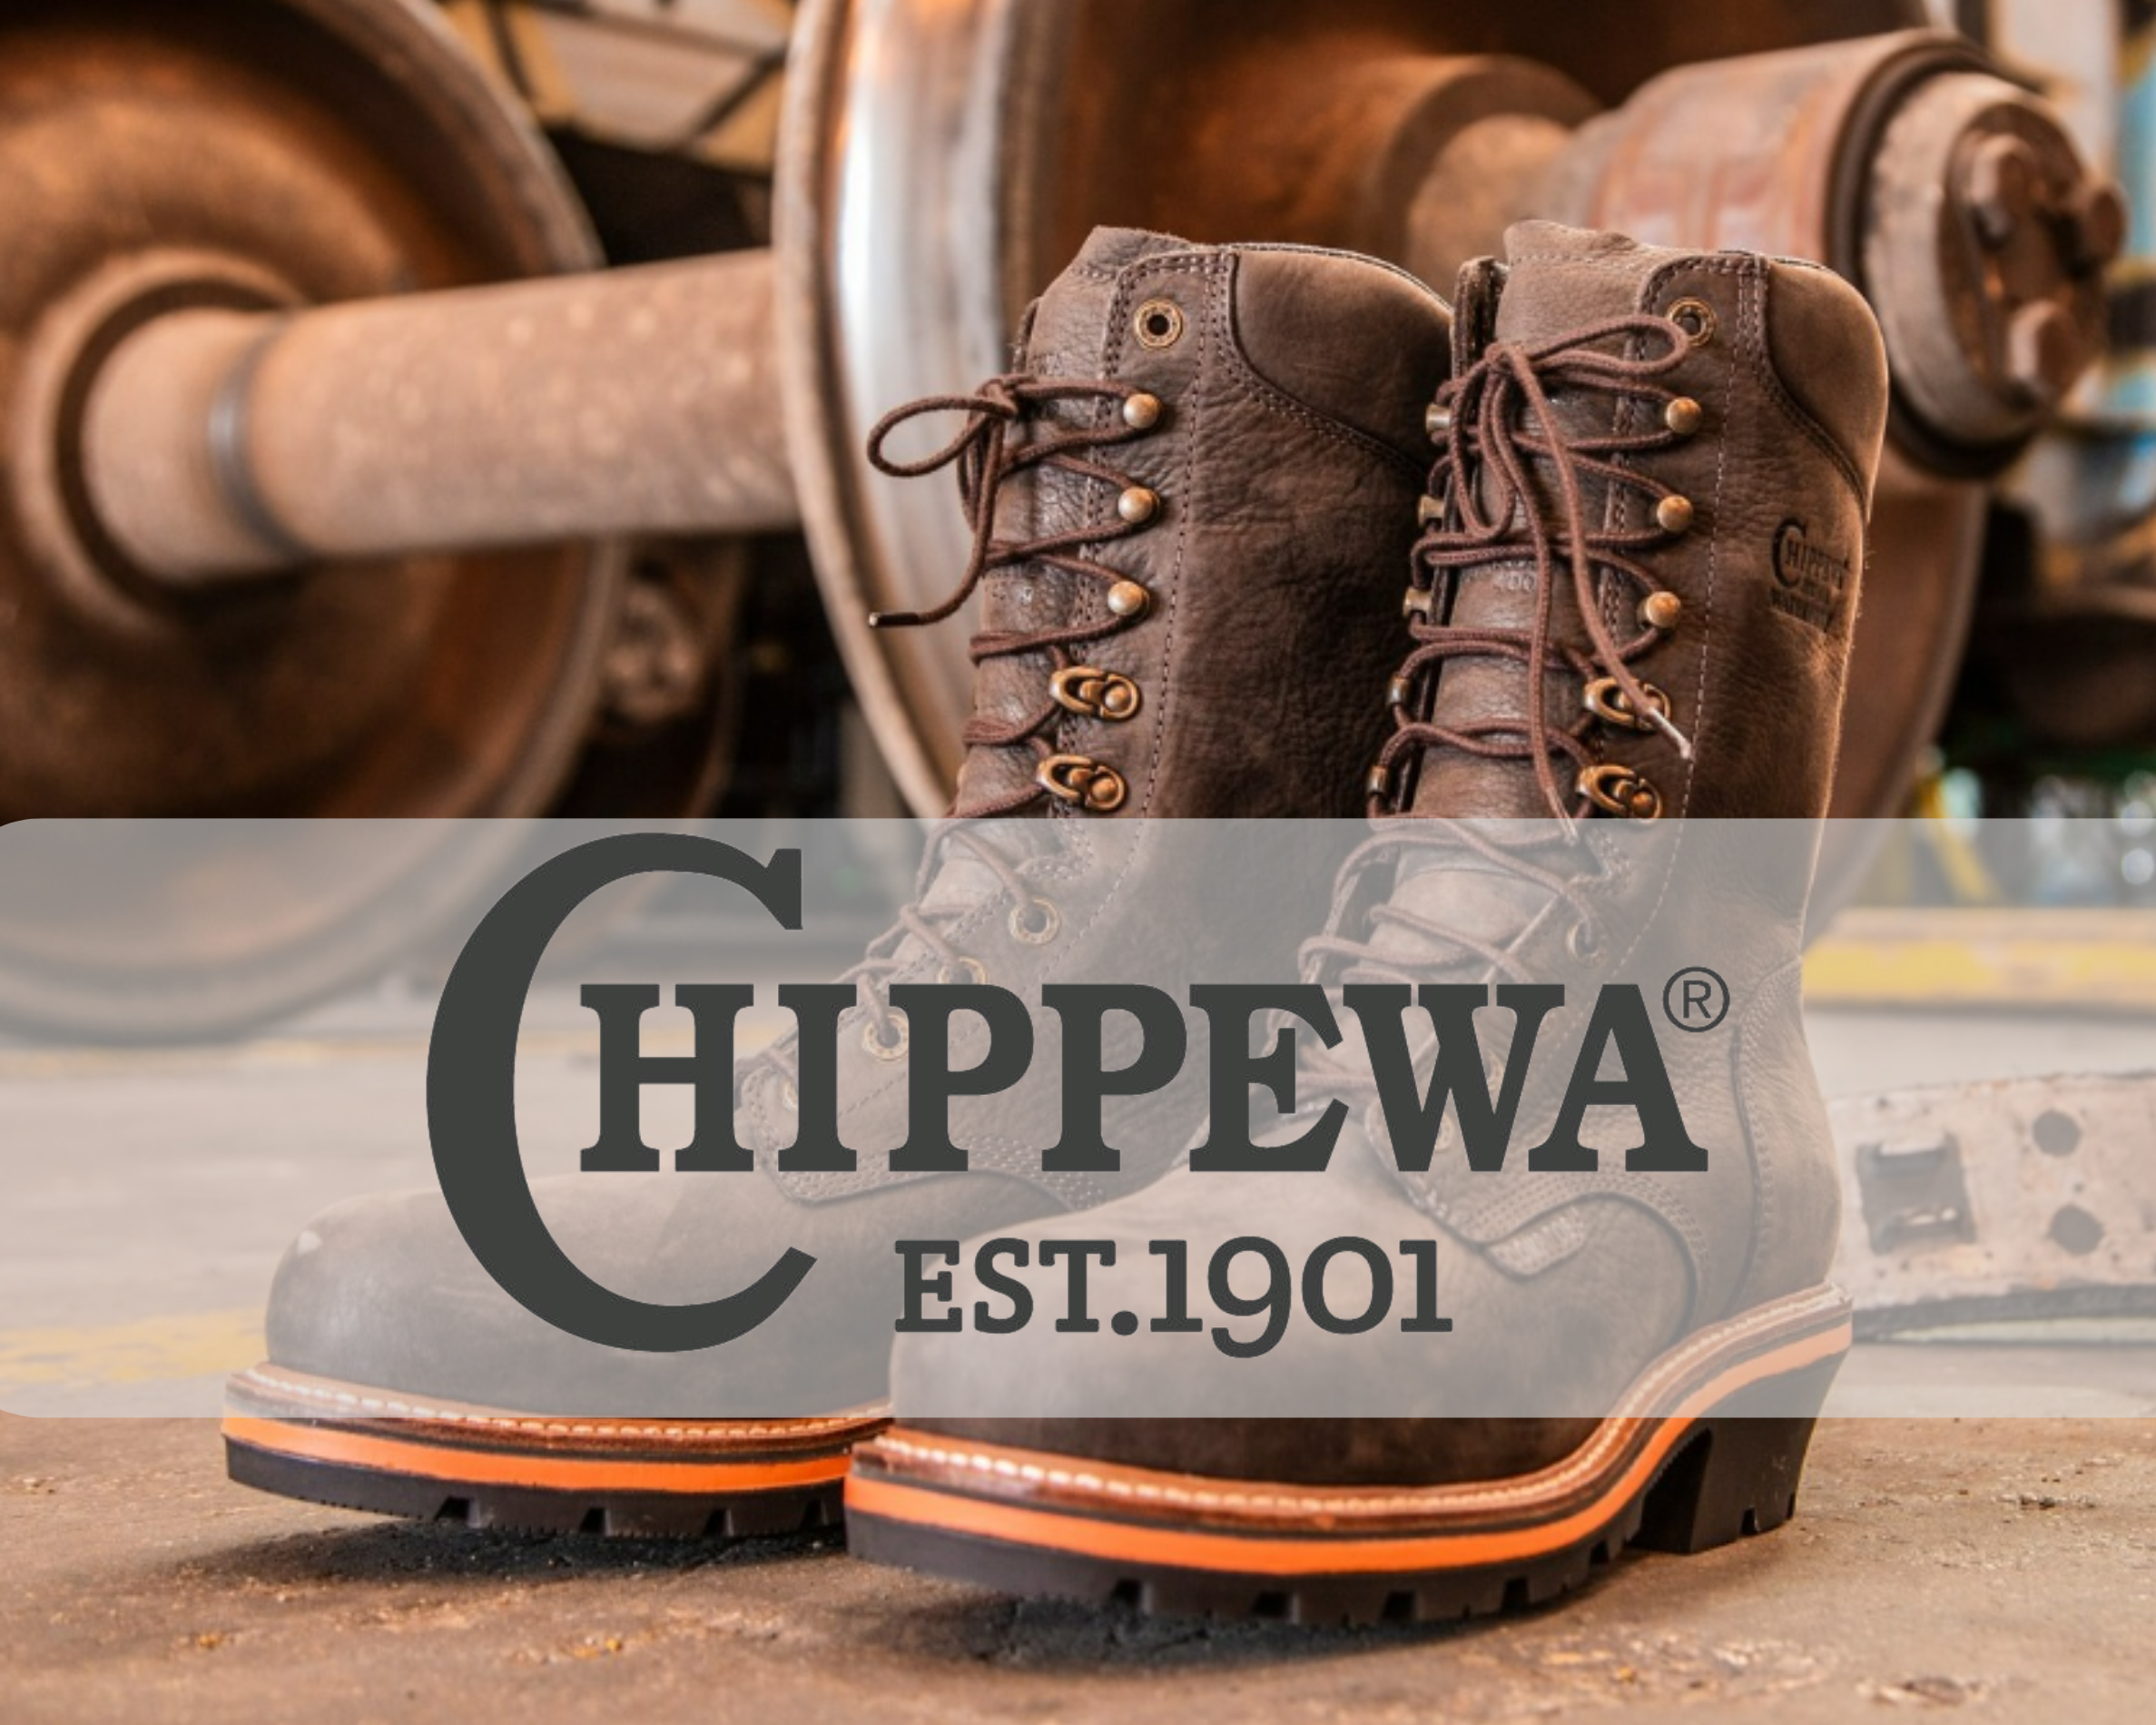 Chippewa Boots collection image